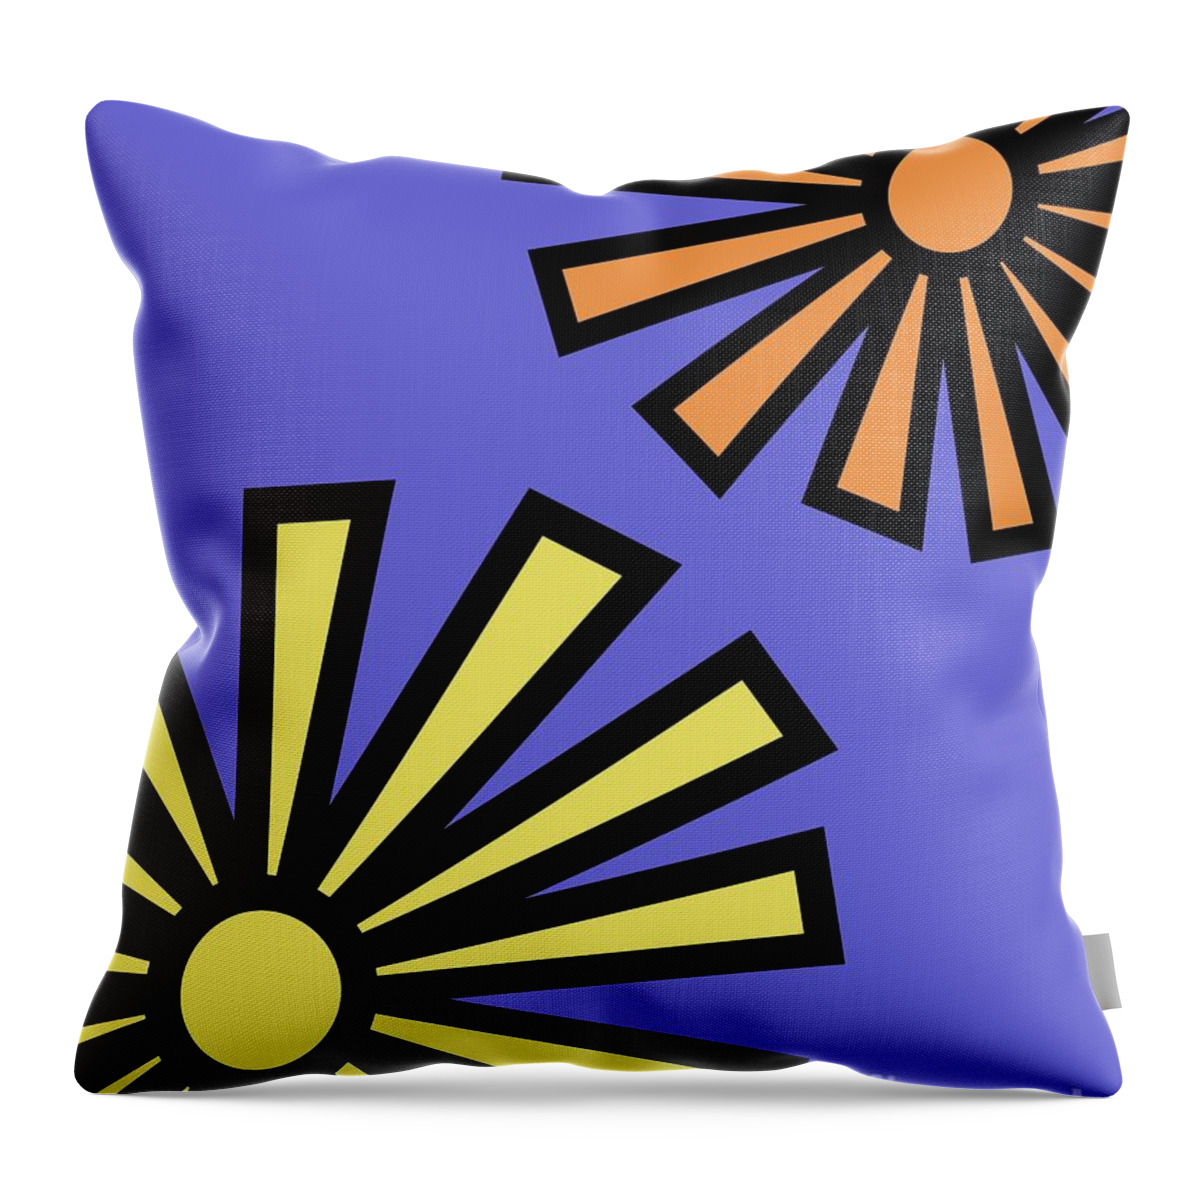 Mod Throw Pillow featuring the digital art Mod Flowers 4 on Twilight by Donna Mibus